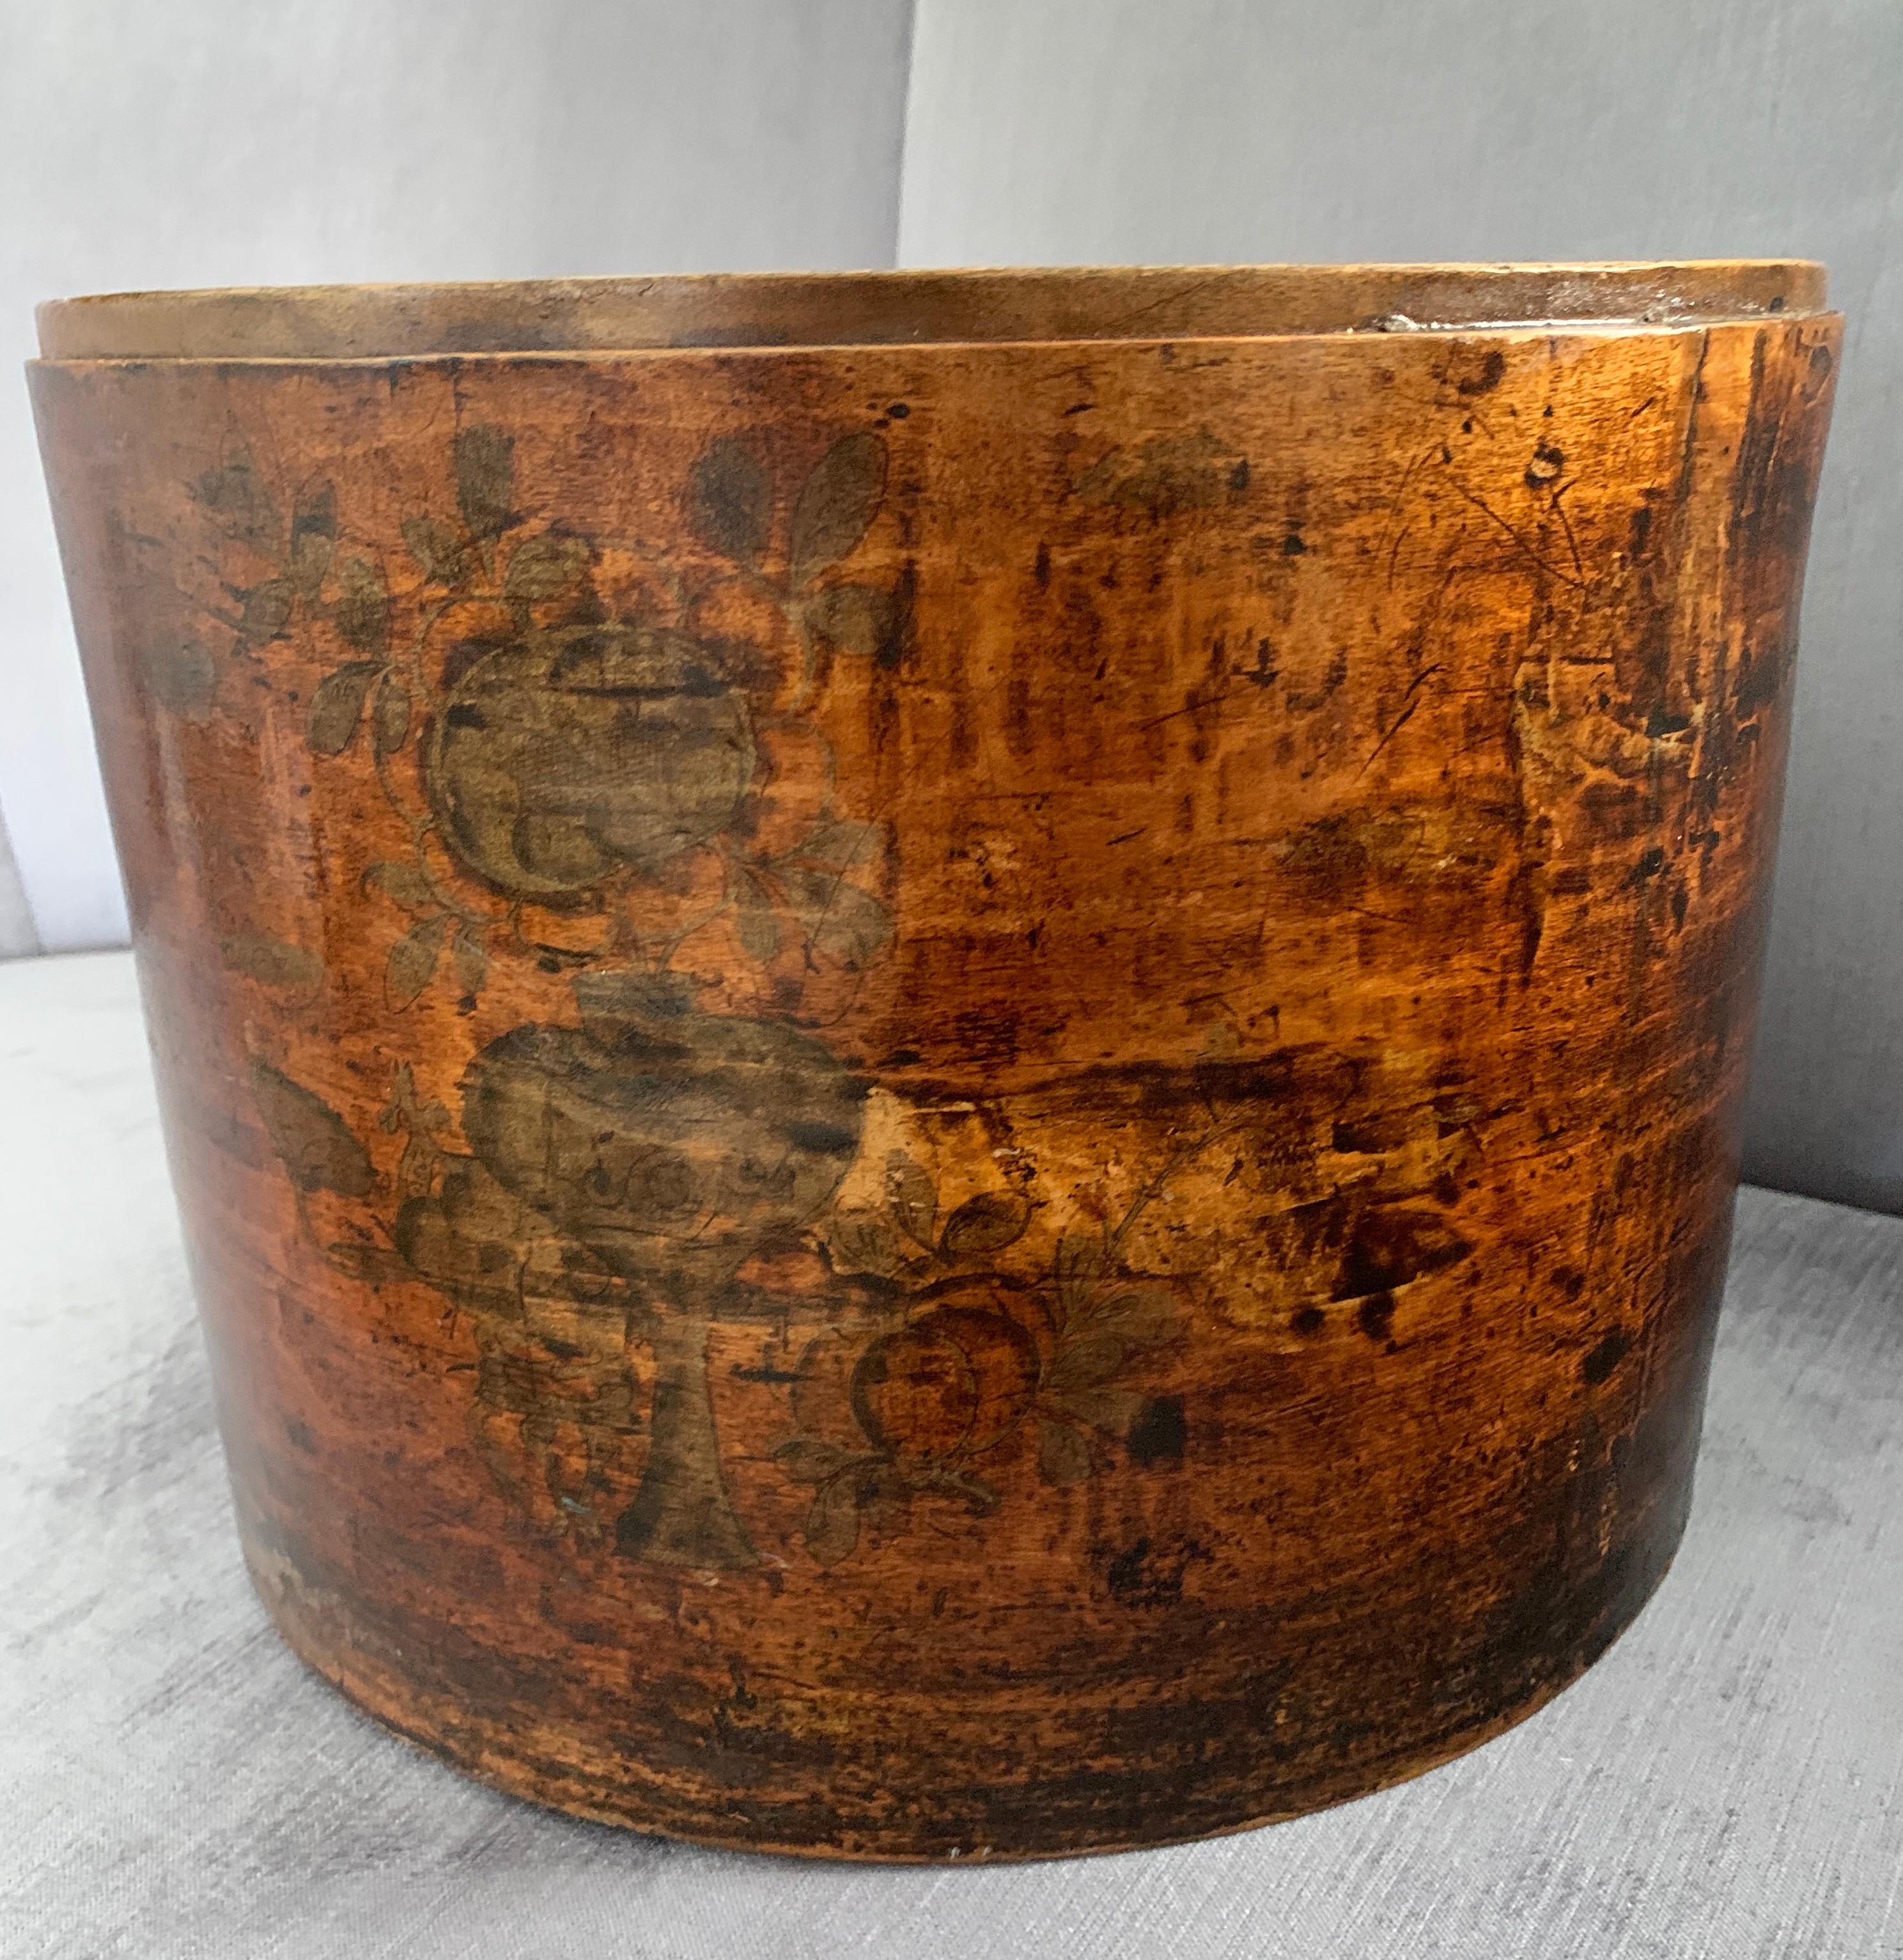 A Chinese wooden hat box - handmade, with a chinoiserie image. The box is in very good condition with fitted top, the wood is a wonderful patinated color. A complimentary decor to any shelf and great storage box, from love letters to sewing